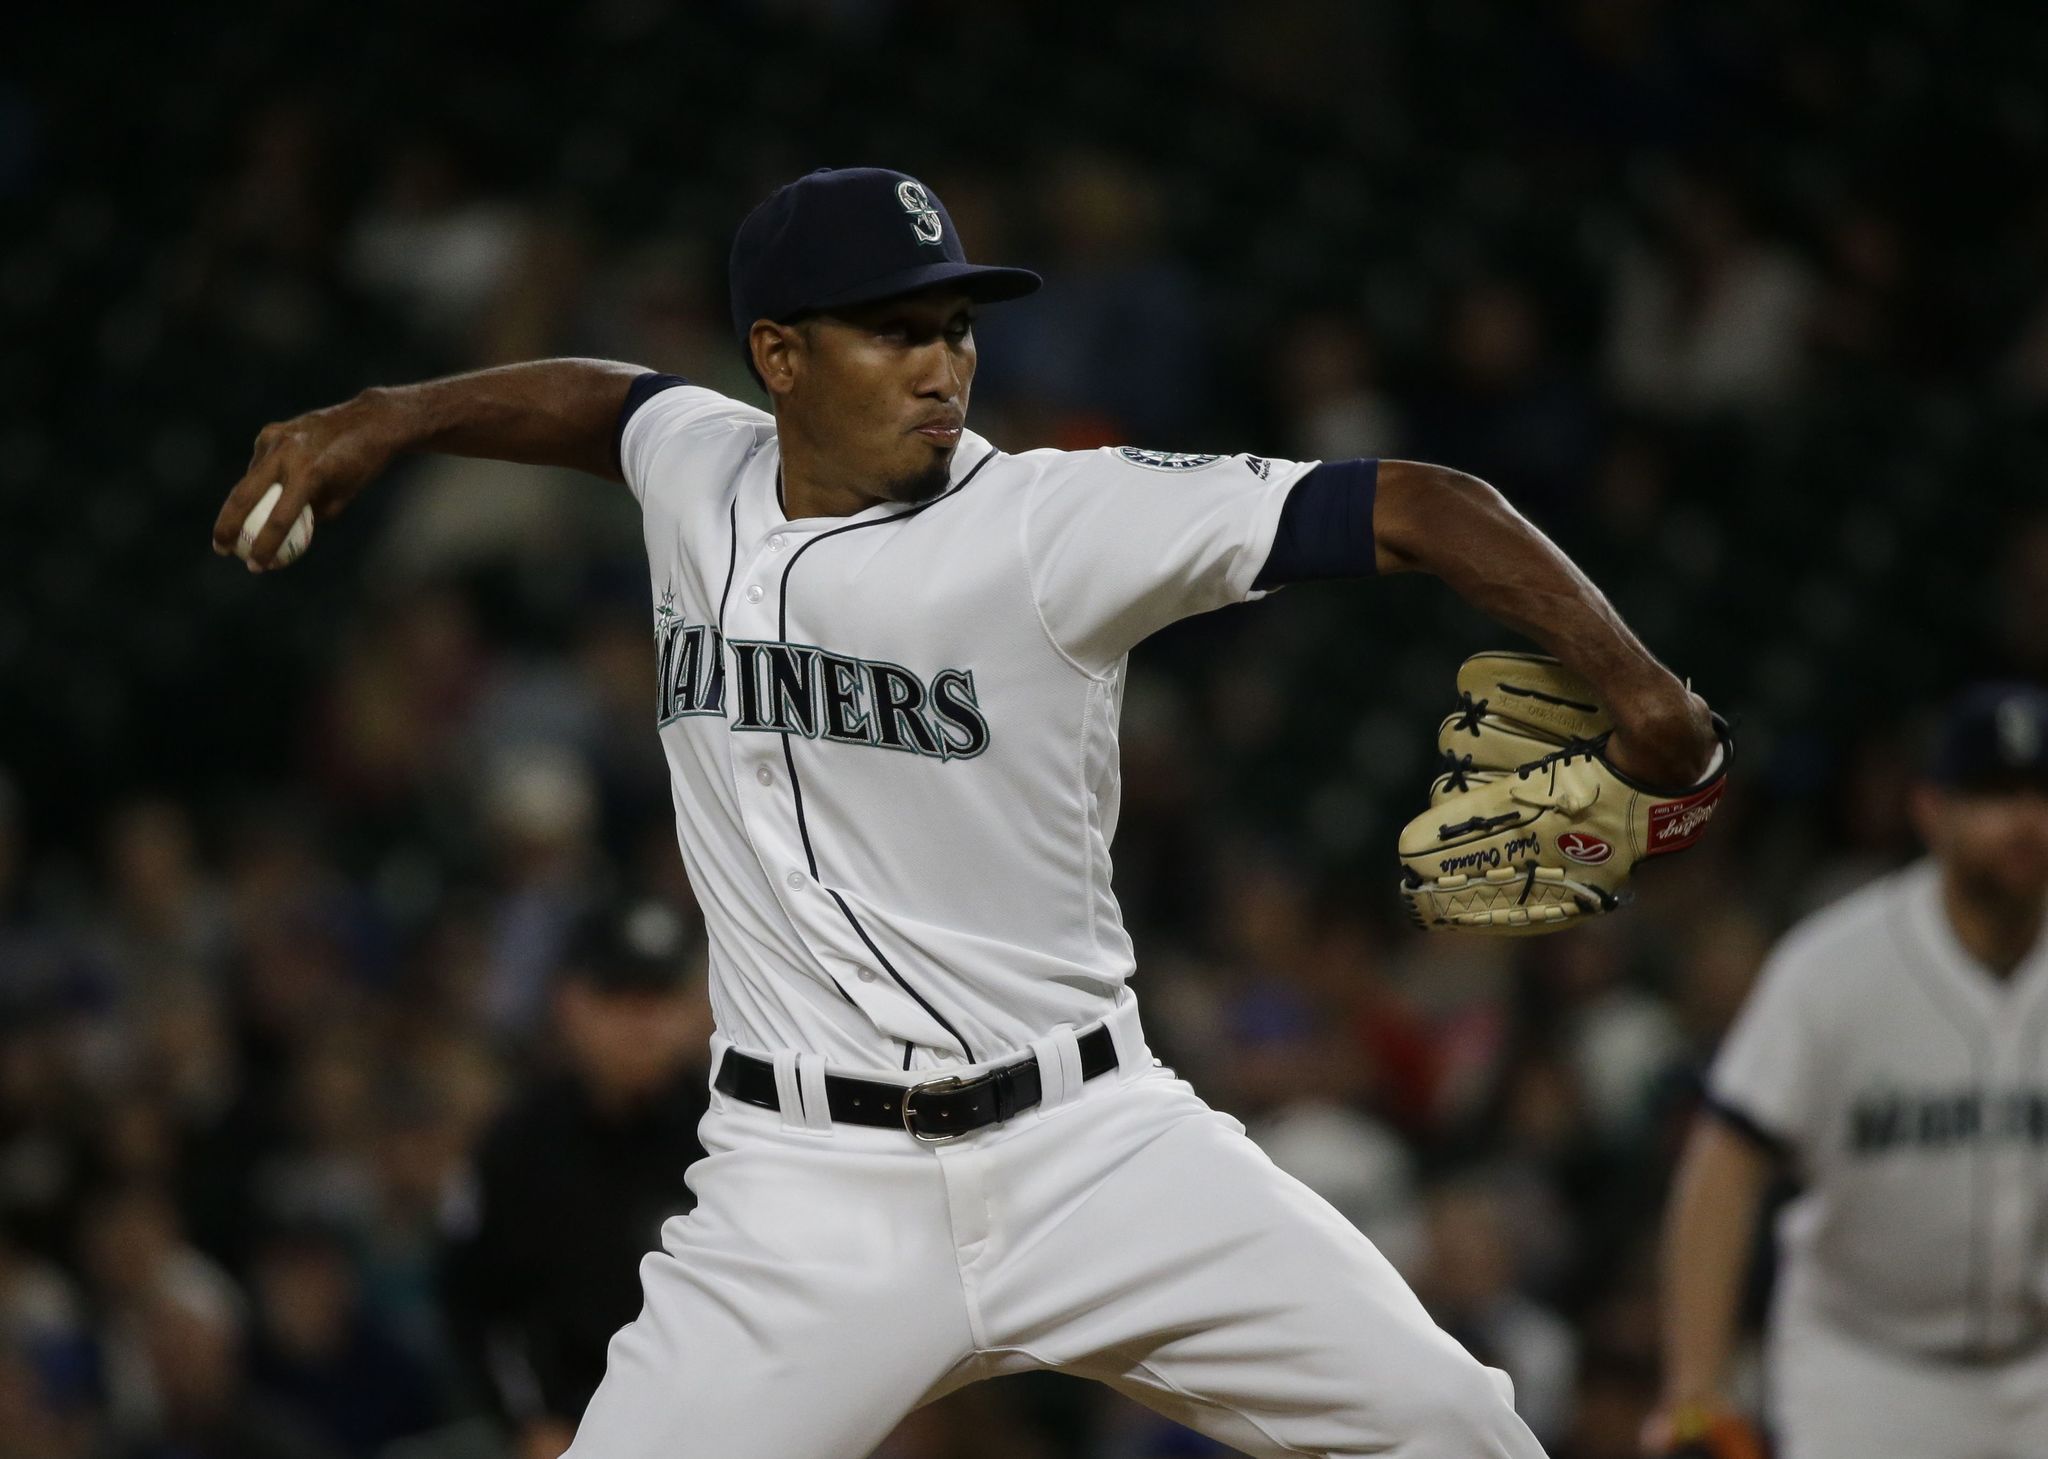 In his first three appearances, Mariners relief pitcher Edwin Diaz struck out three in 22/3 innings, giving up two hits and two walks with a 3.38 ERA.